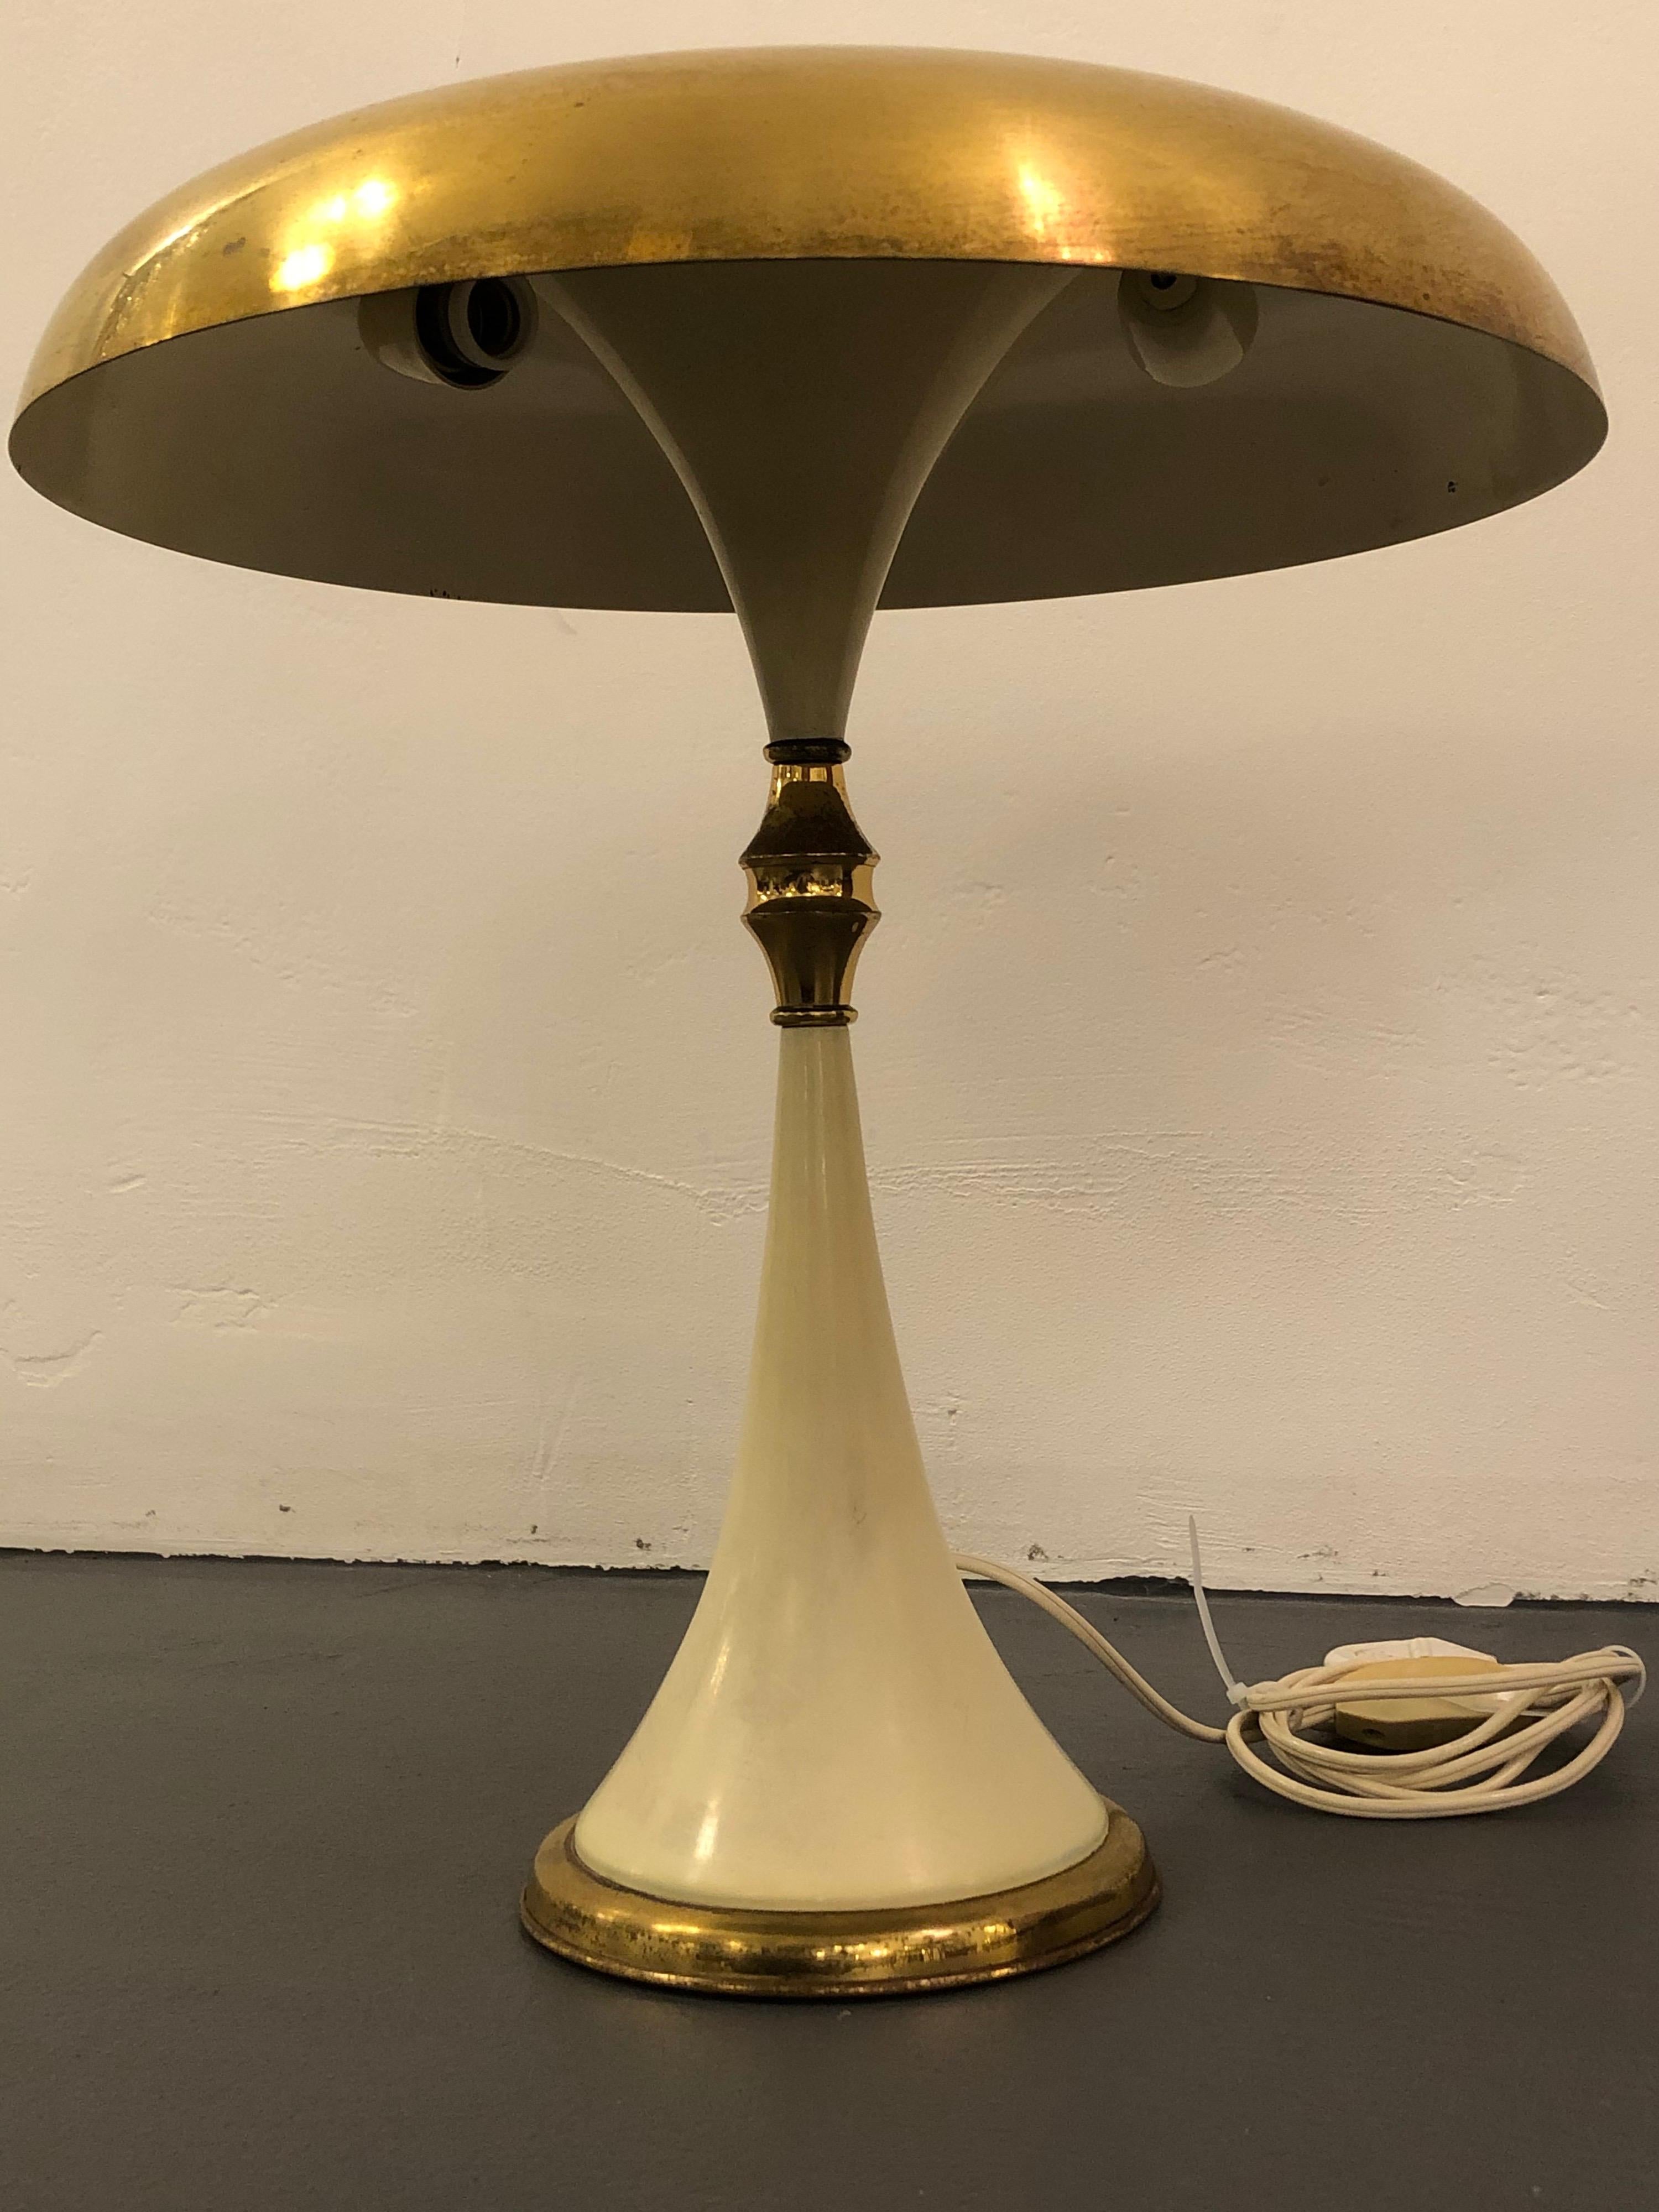 Mid-Century Modern Midcentury Brass and Lacquer Table Lamp by Oscar Torlasco for Lumi, 1950s For Sale